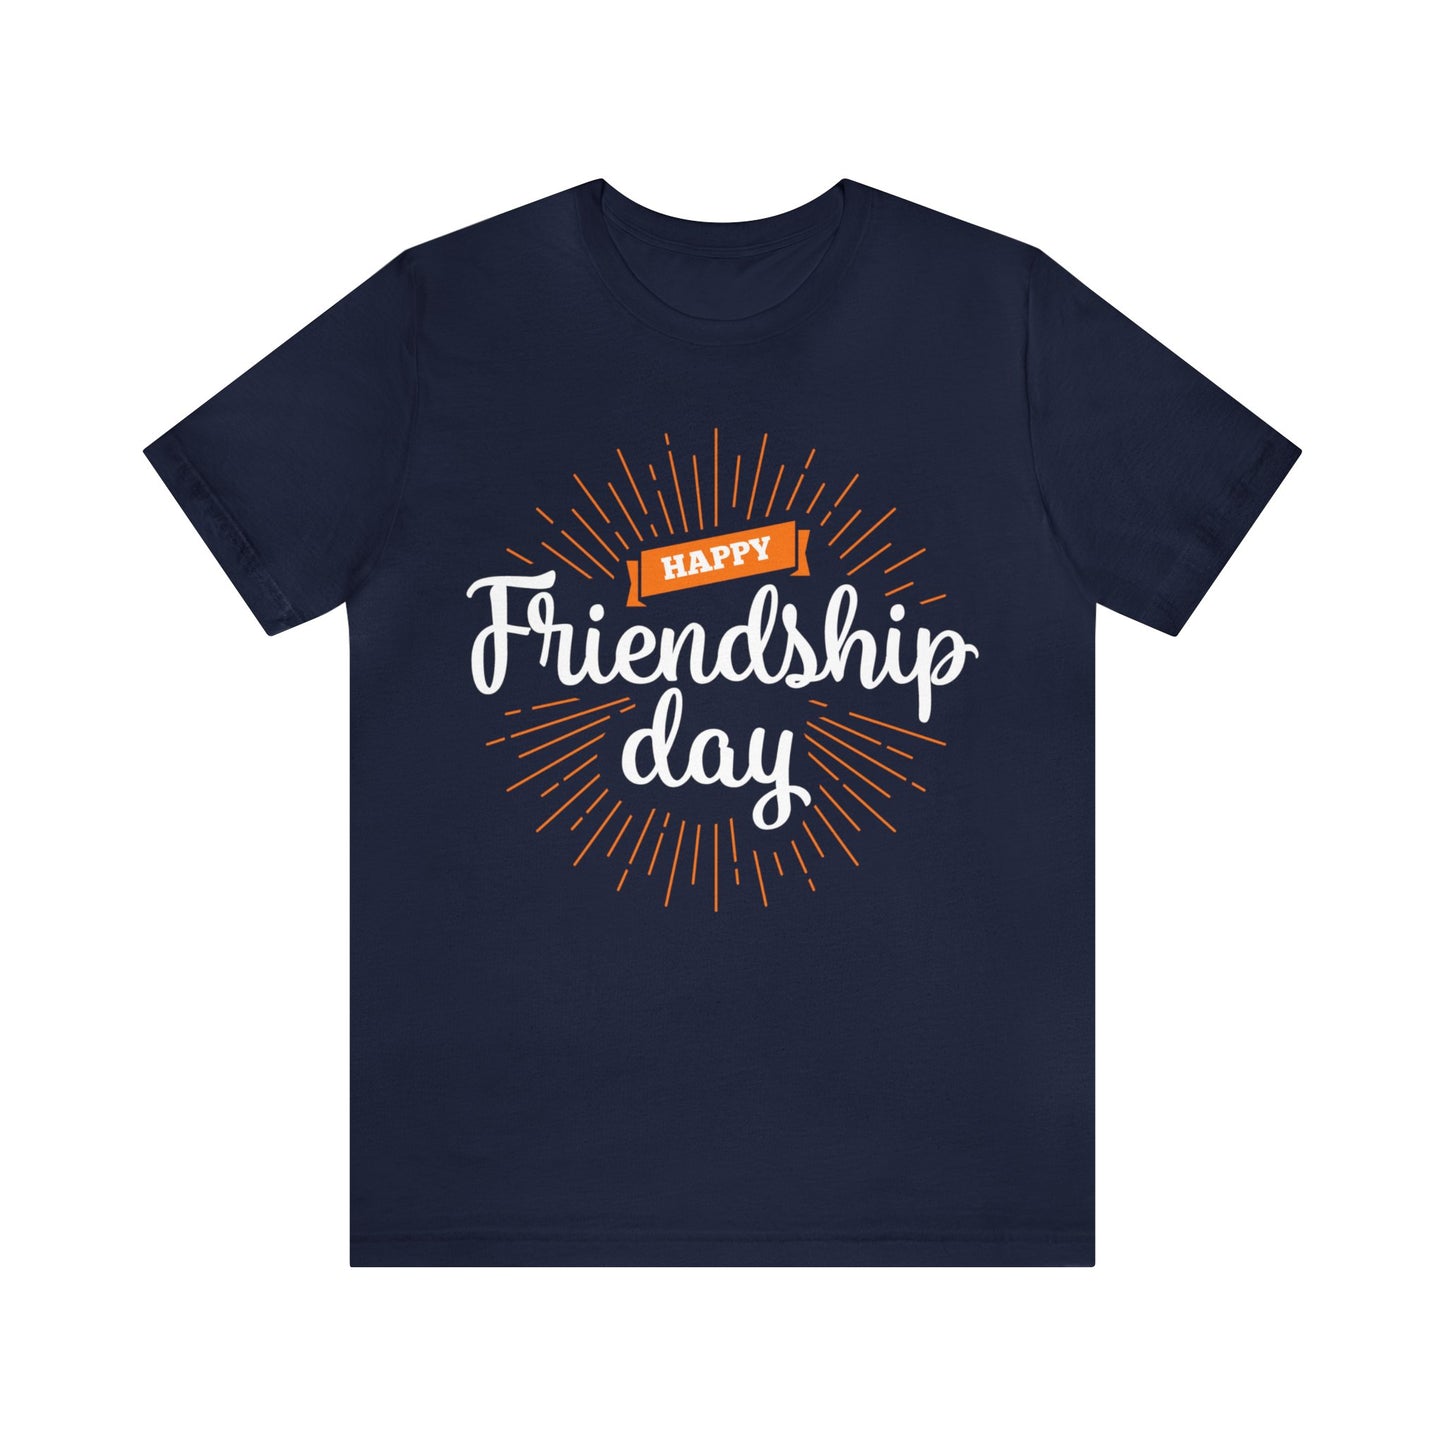 Celebrate Happy Friendship Day with our Exclusive T-shirt Collection!